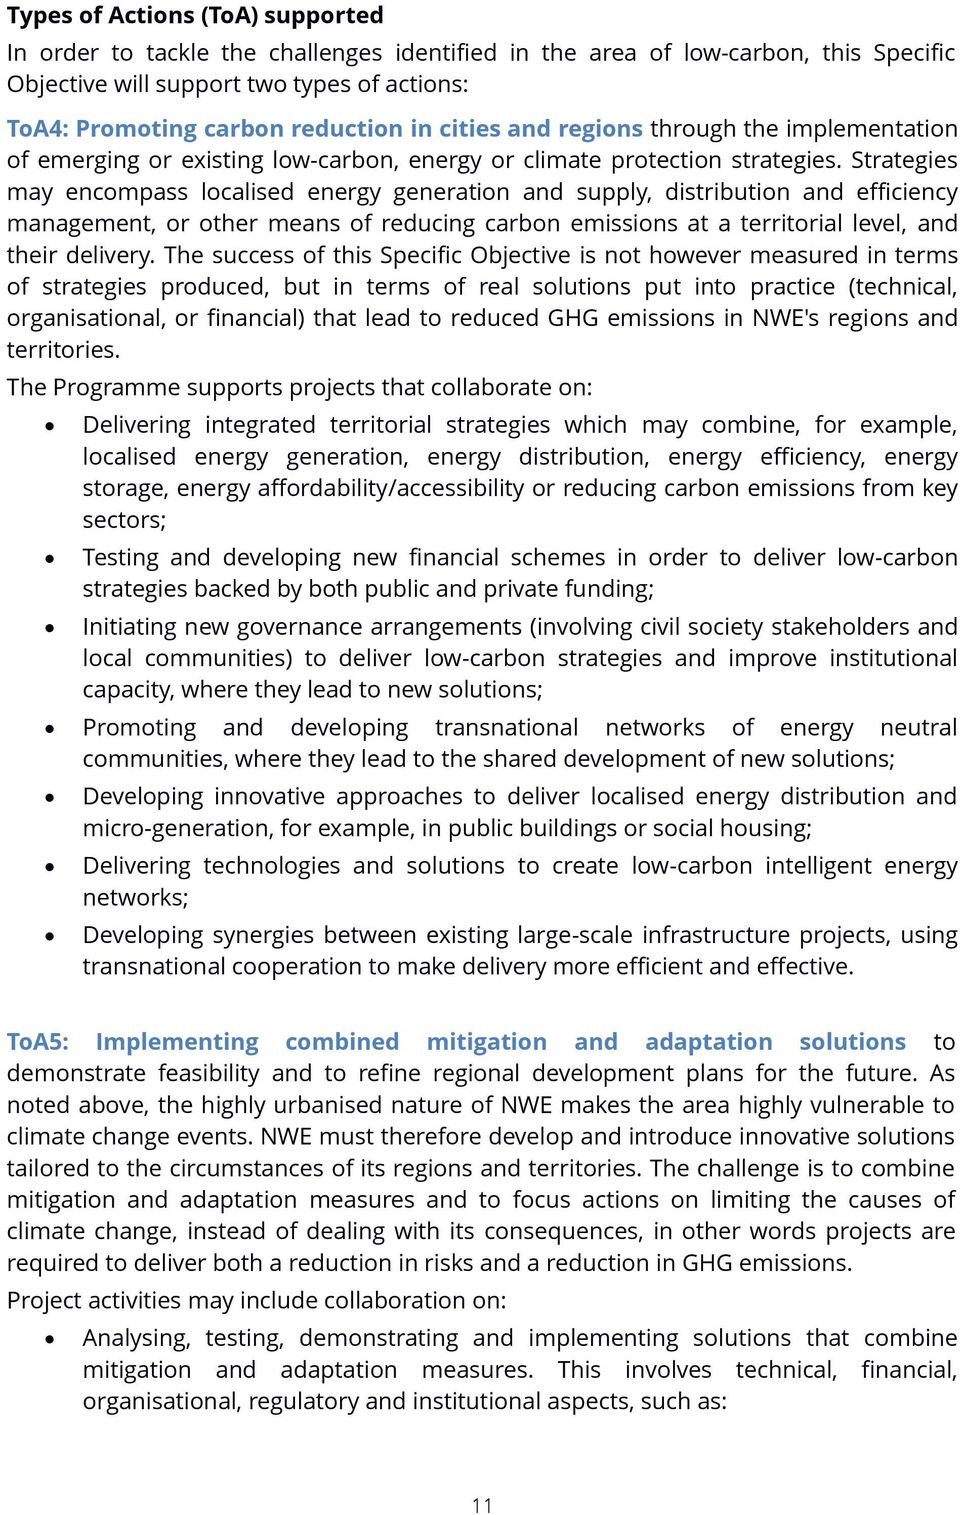 Strategies may encompass localised energy generation and supply, distribution and efficiency management, or other means of reducing carbon emissions at a territorial level, and their delivery.